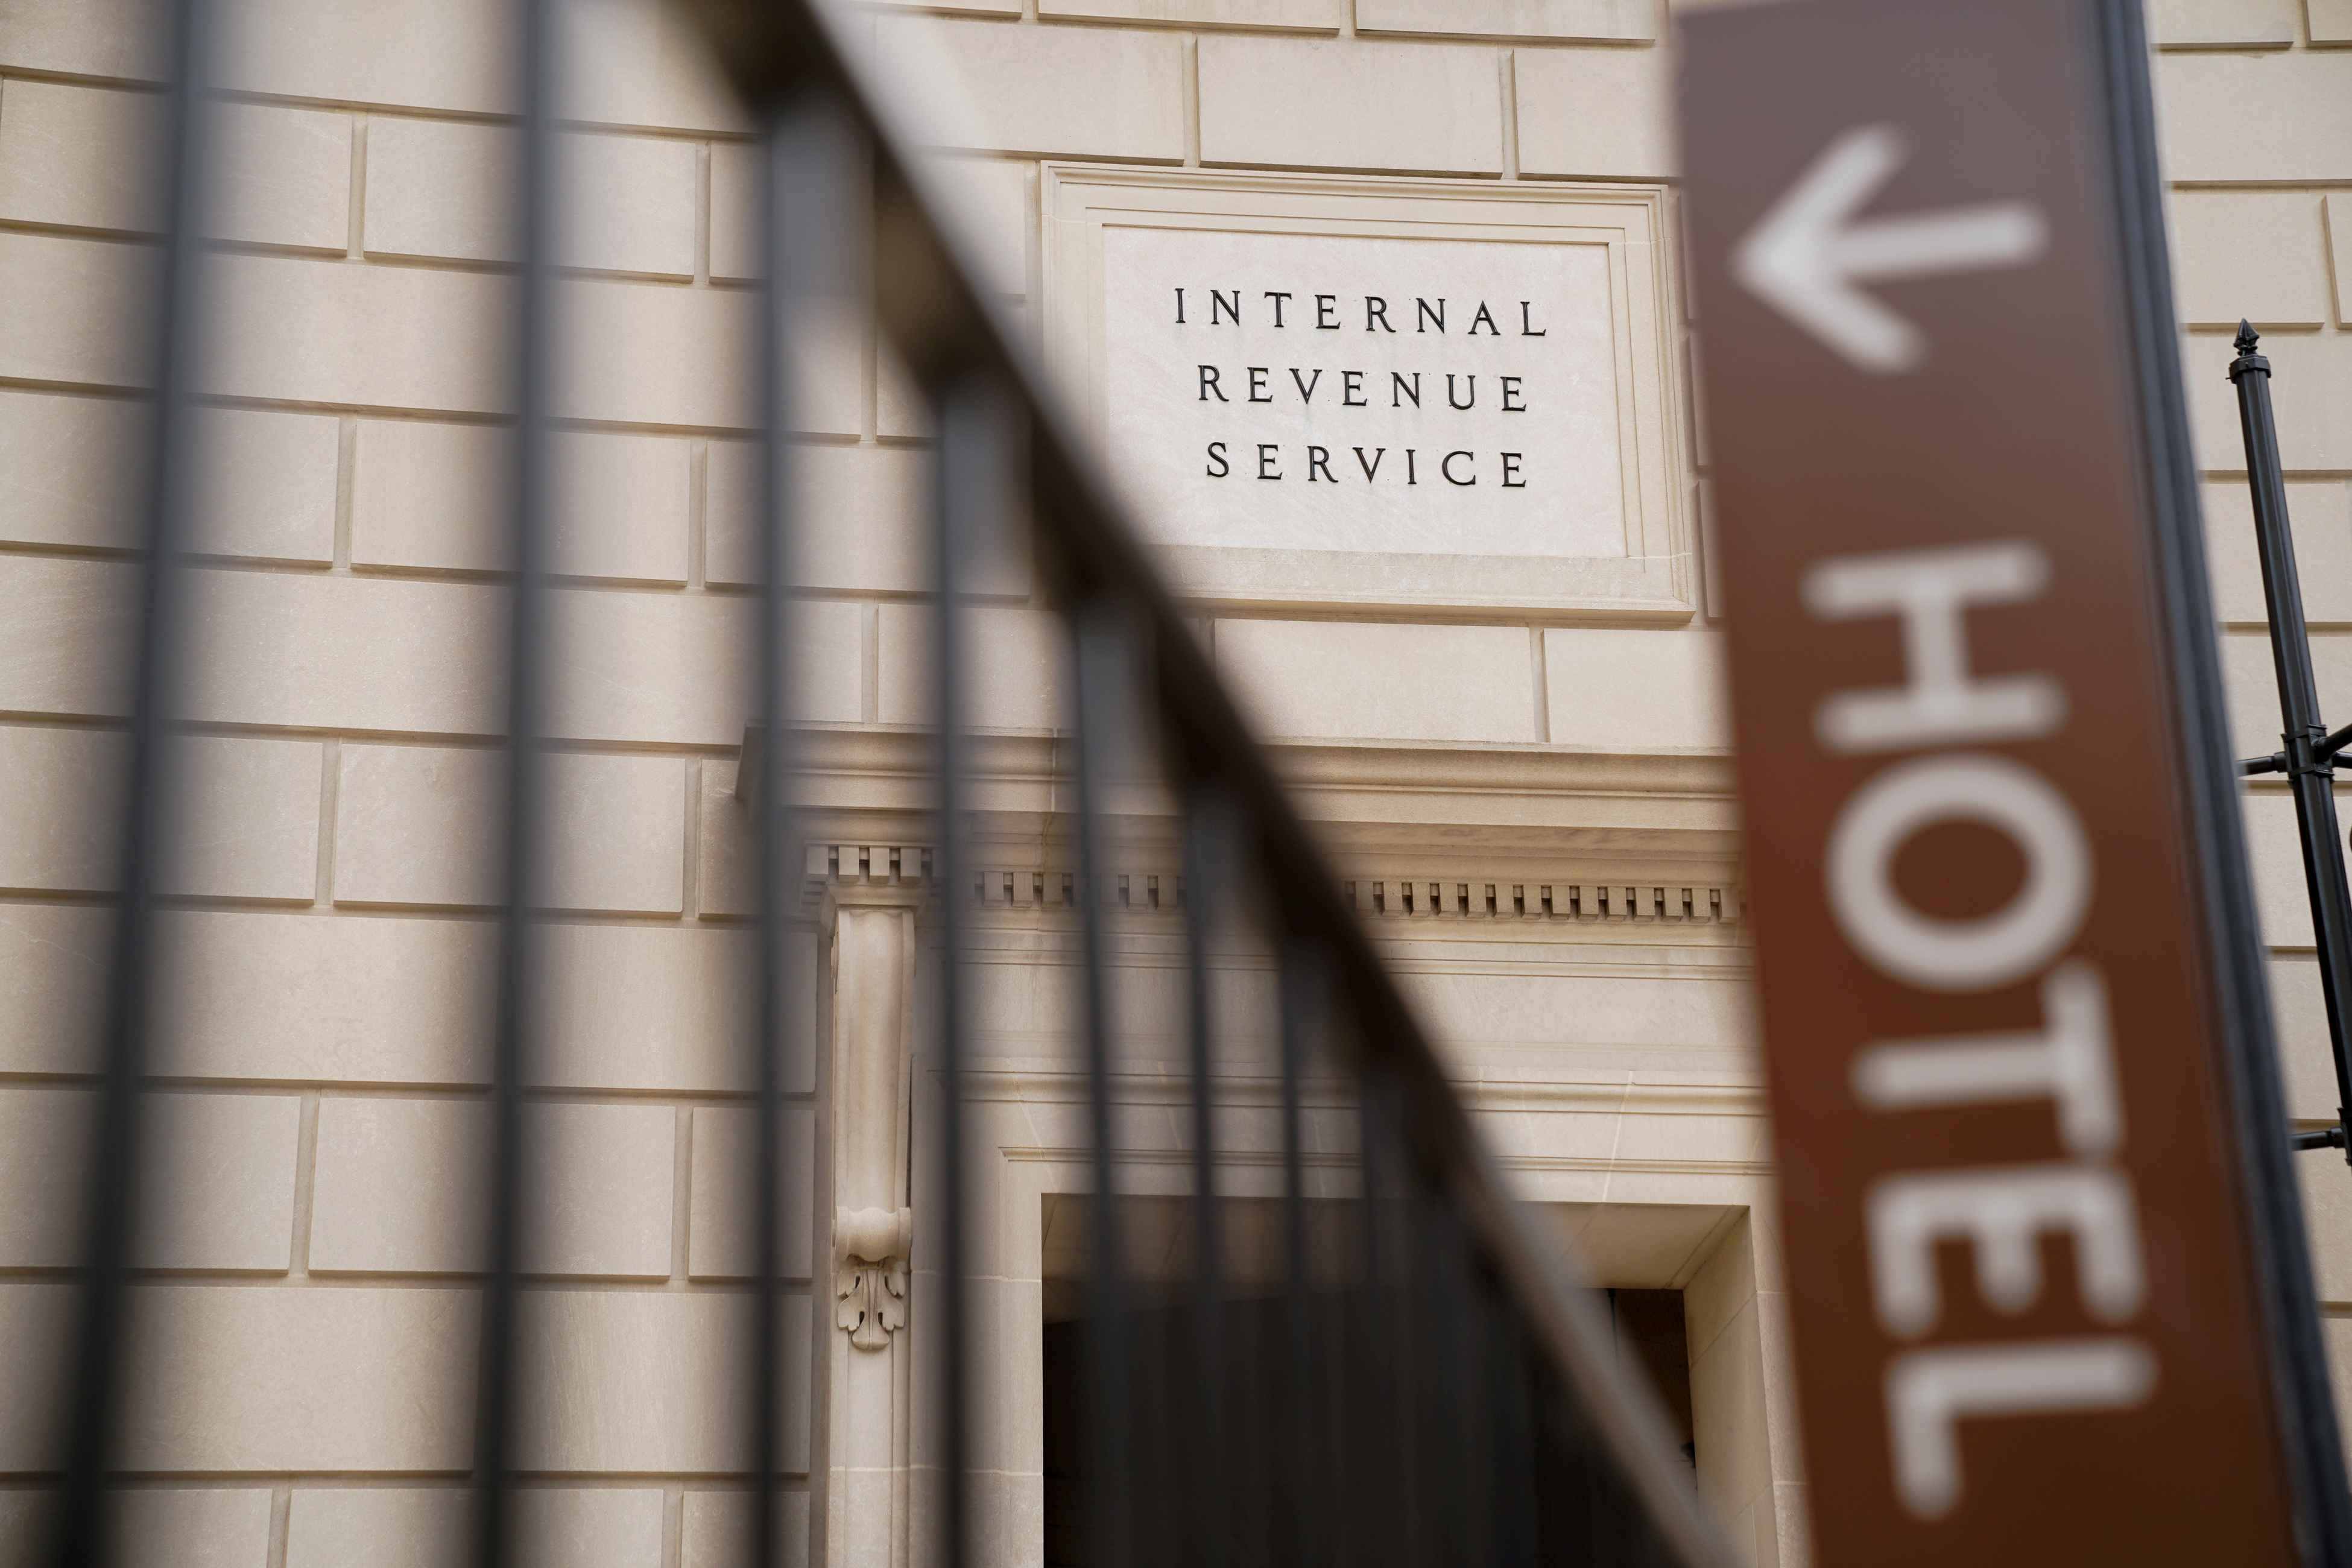 The Internal Revenue Service building is seen behind a sign for the Trump International Hotel